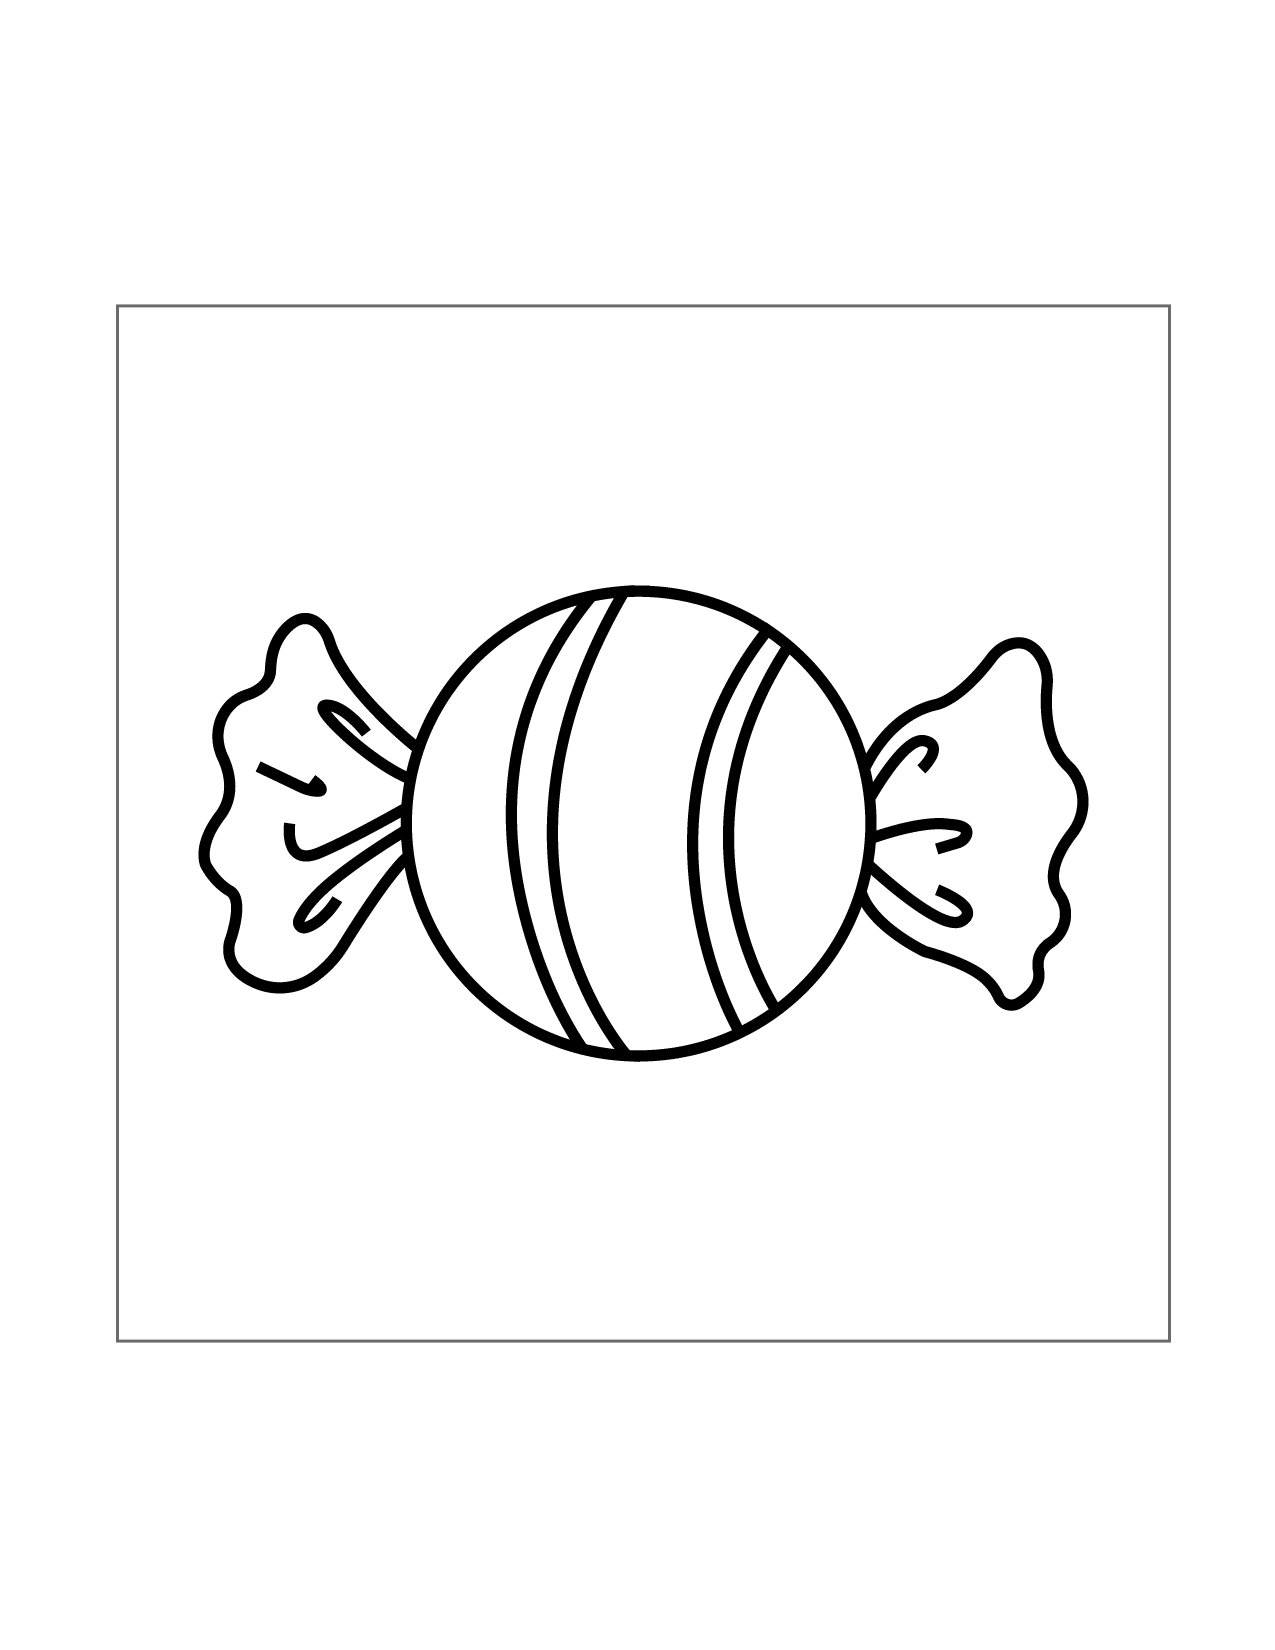 Wrapped Candy Coloring Page